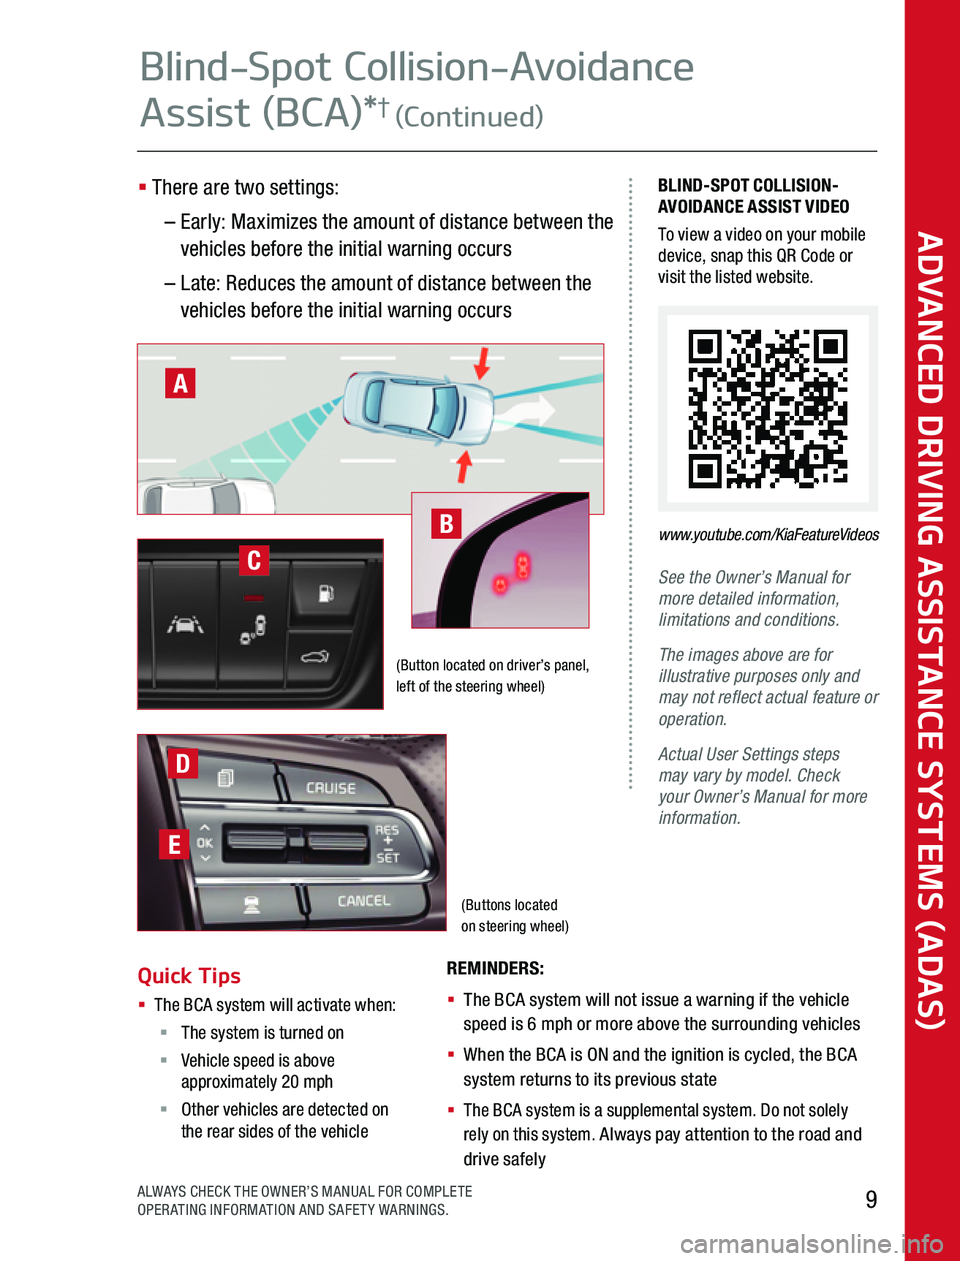 KIA RIO 2020  Advanced Driving Assistance System (Buttons located  on steering wheel)
BLIND-SPOT COLLISION-AVOIDANCE ASSIST VIDEOTo view a video on your mobile device, snap this QR Code or visit the listed website  
See the Owner’s Manual for more